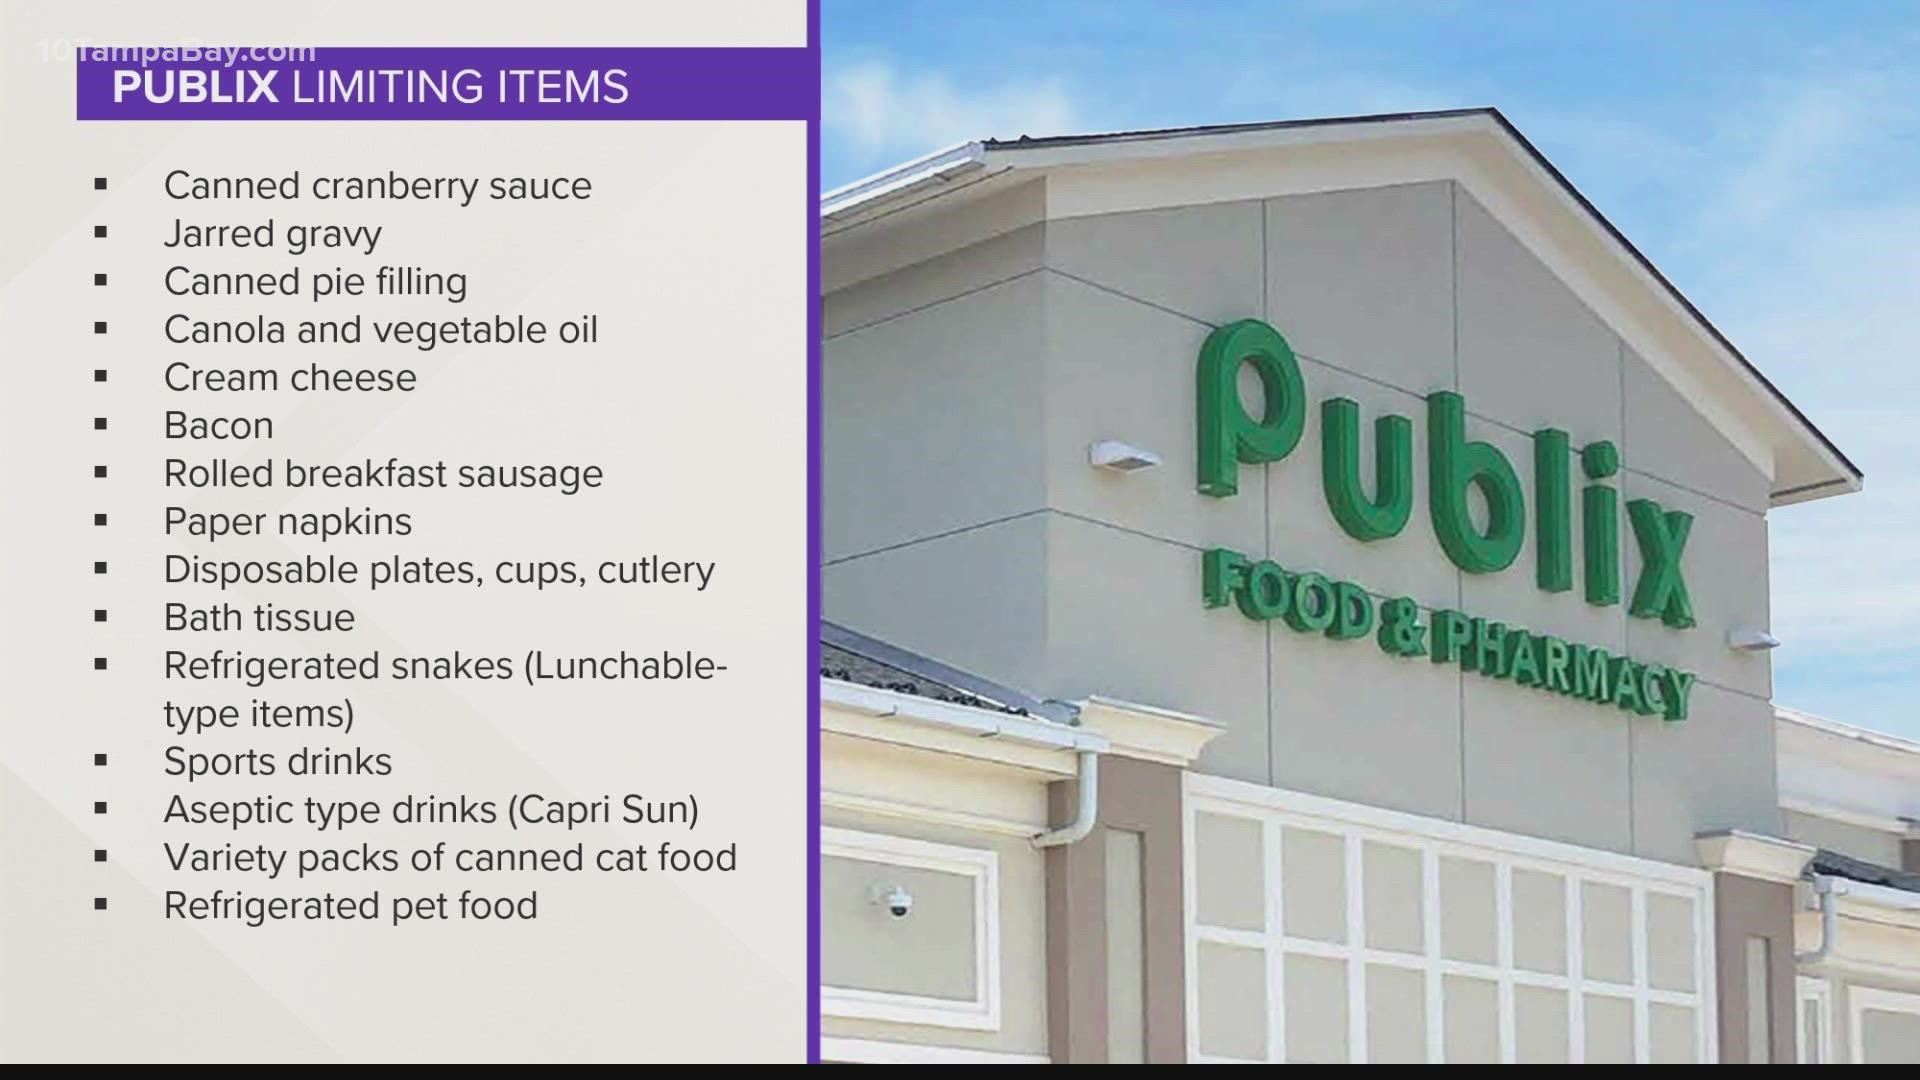 An increased holiday demand has forced retailers like Publix Supermarkets to establish purchase limits for certain items.